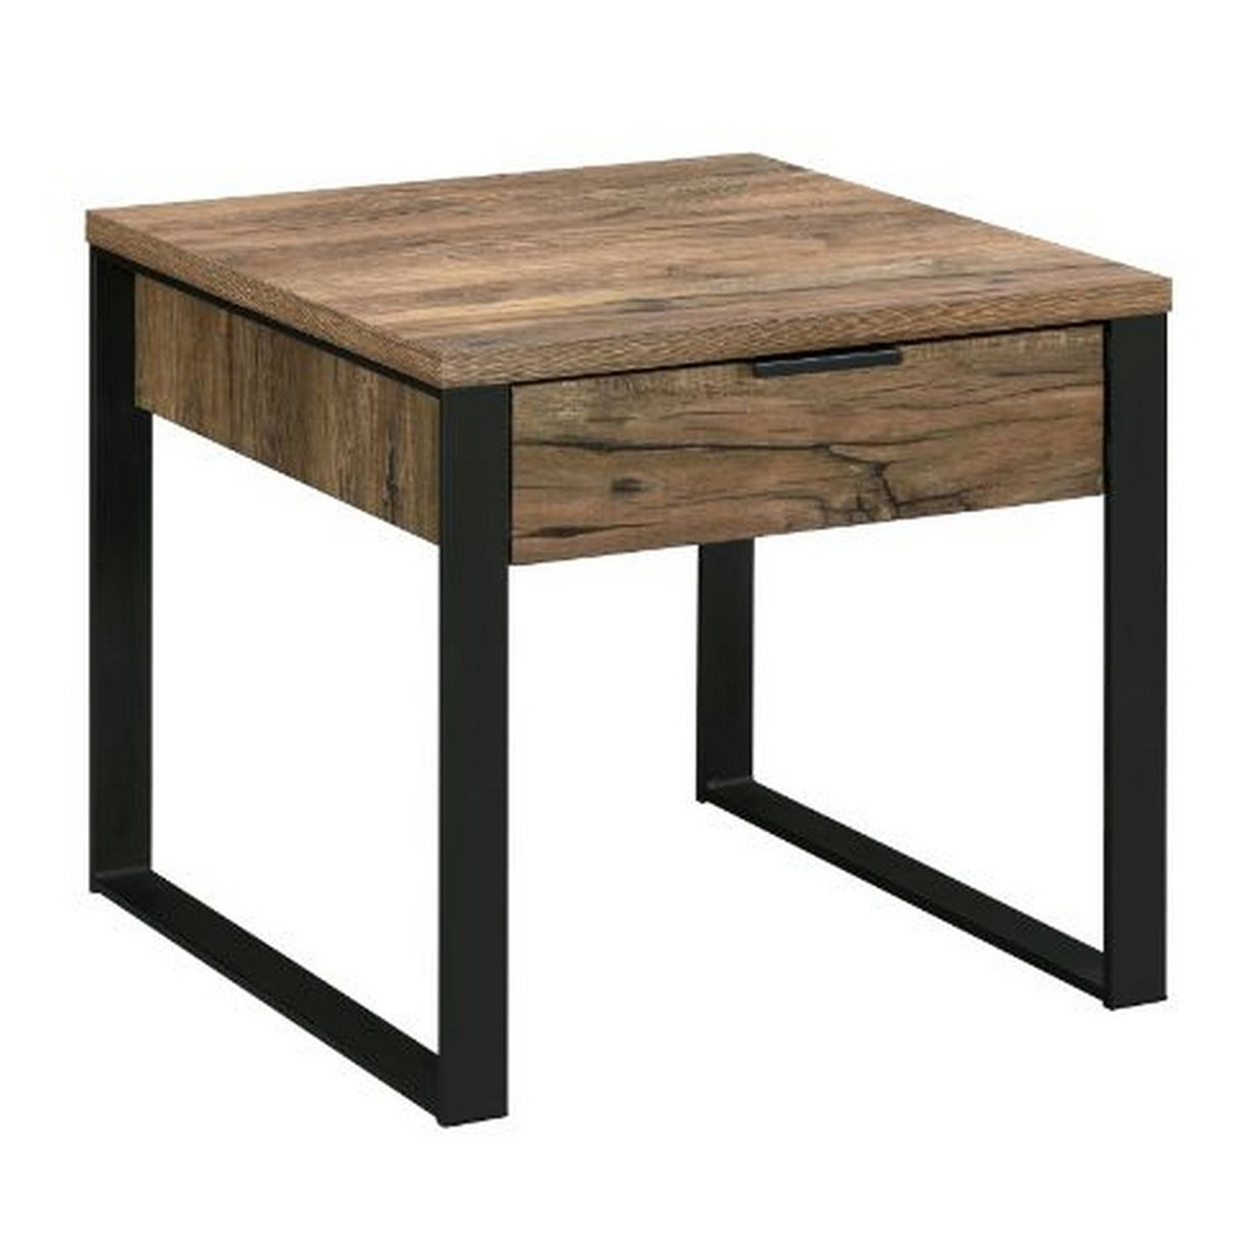 End Table With 1 Drawer And Grain Details, Brown And Black- Saltoro Sherpi